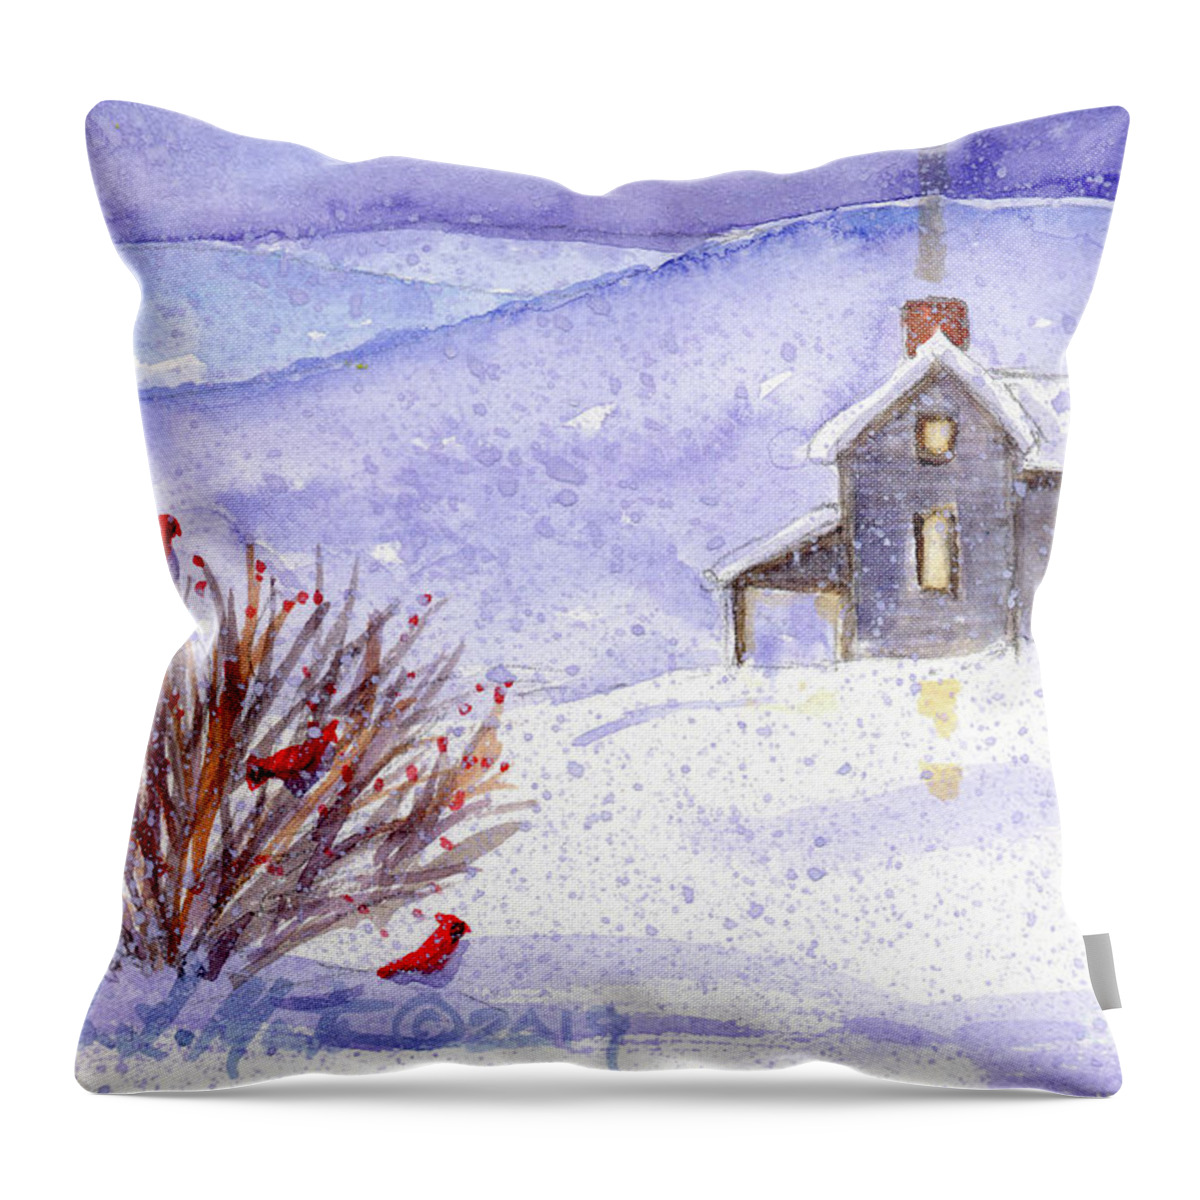 Snow Throw Pillow featuring the painting Cardinals by Linda L Martin